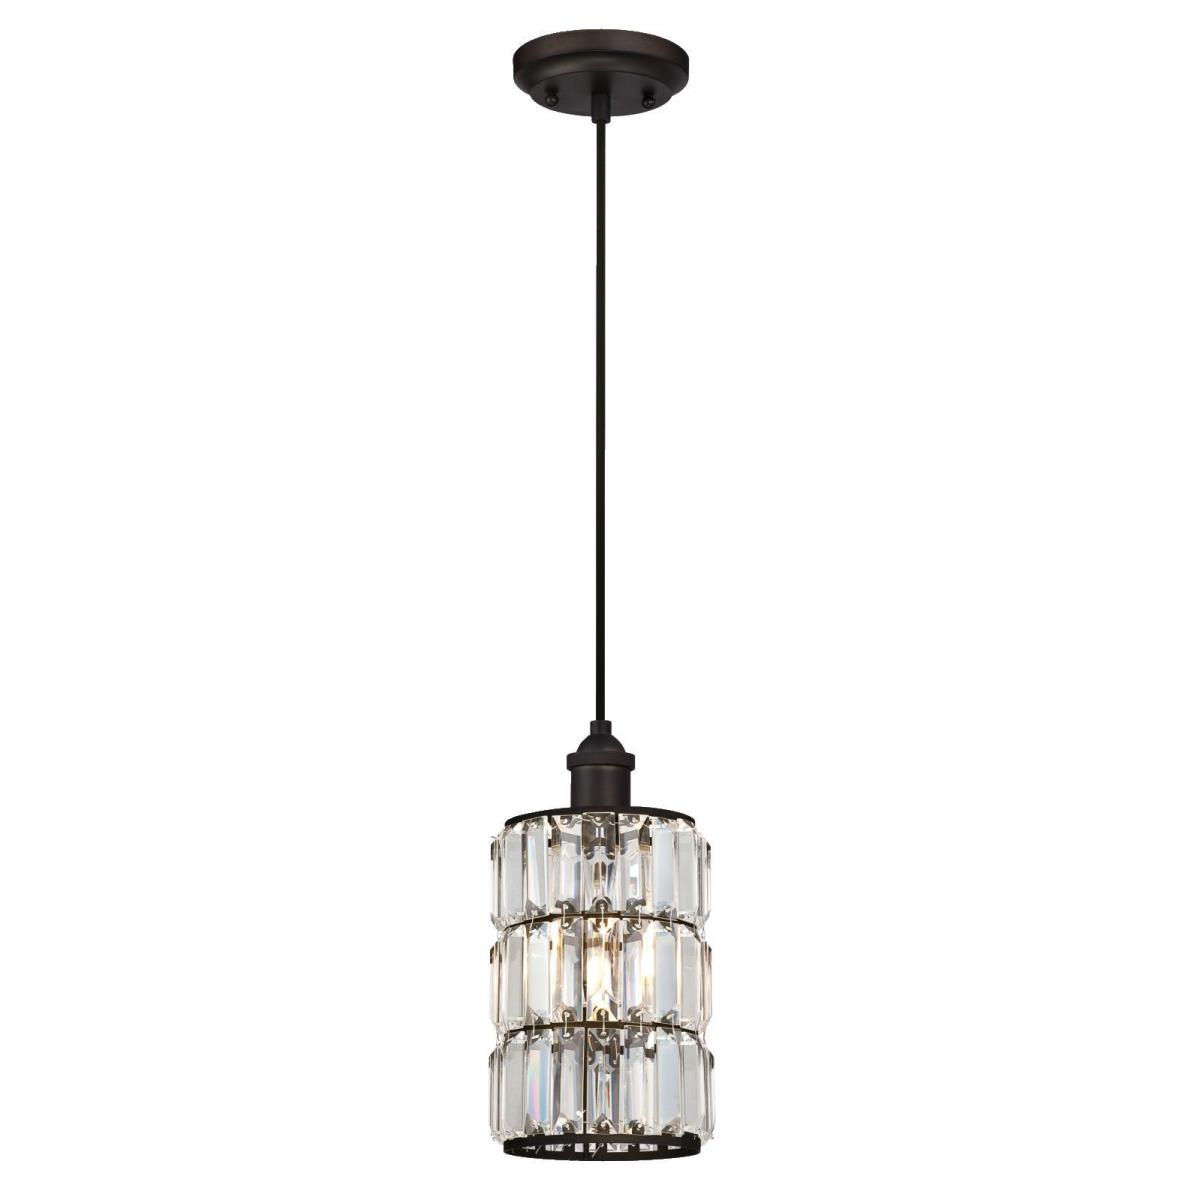 1 Light Mini Pendant Oil Rubbed Bronze Finish with Crystal Prism Glass